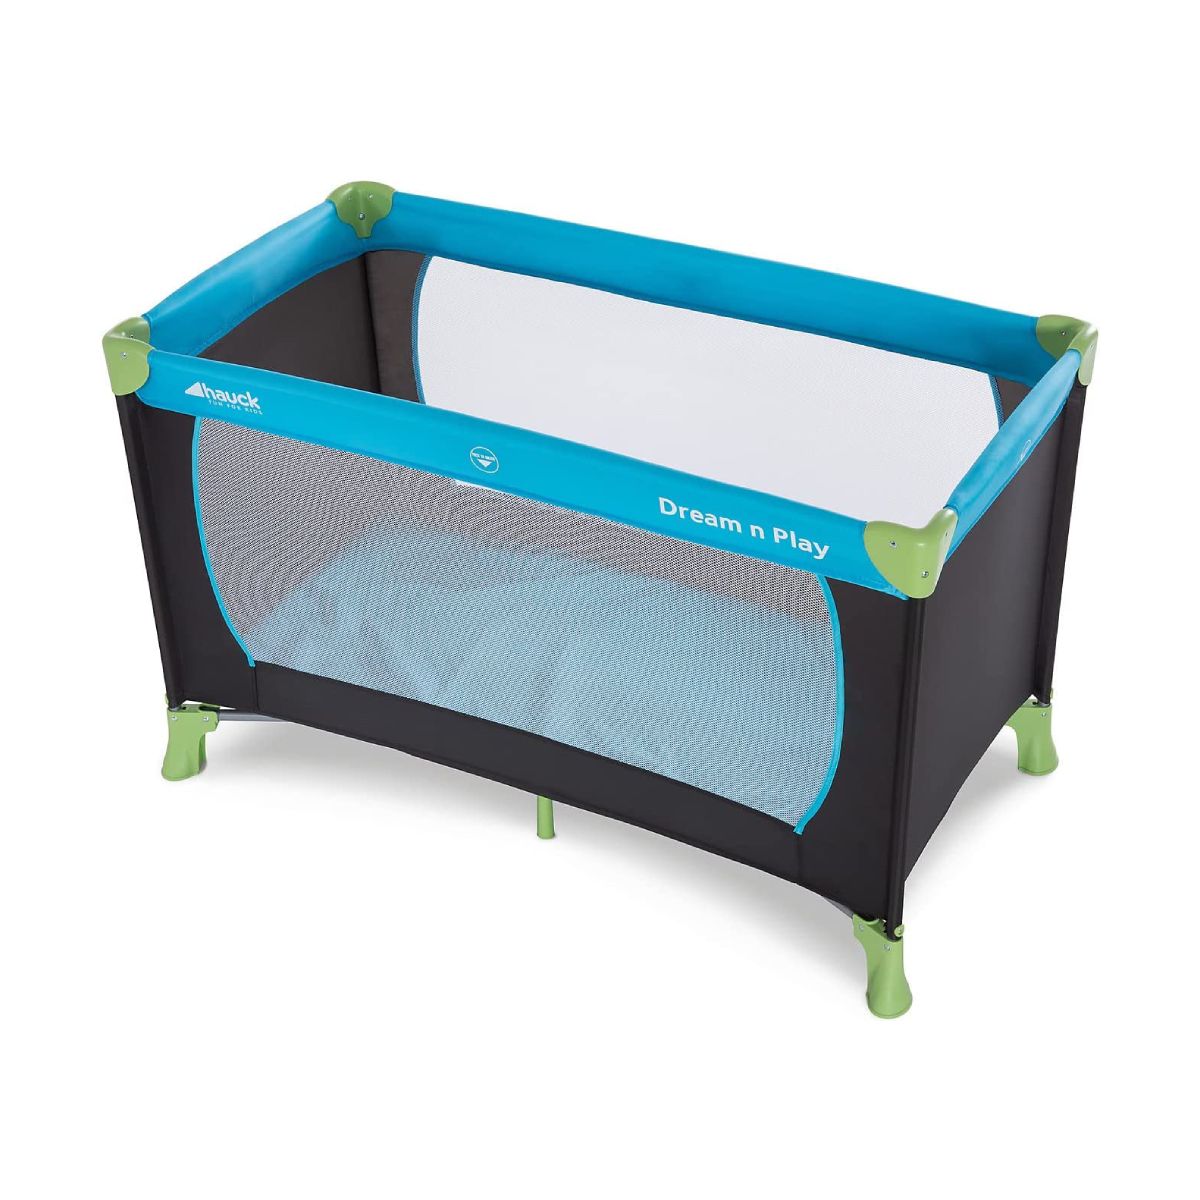 Hauck Dream'n Play Travel Cot - Waterblue.